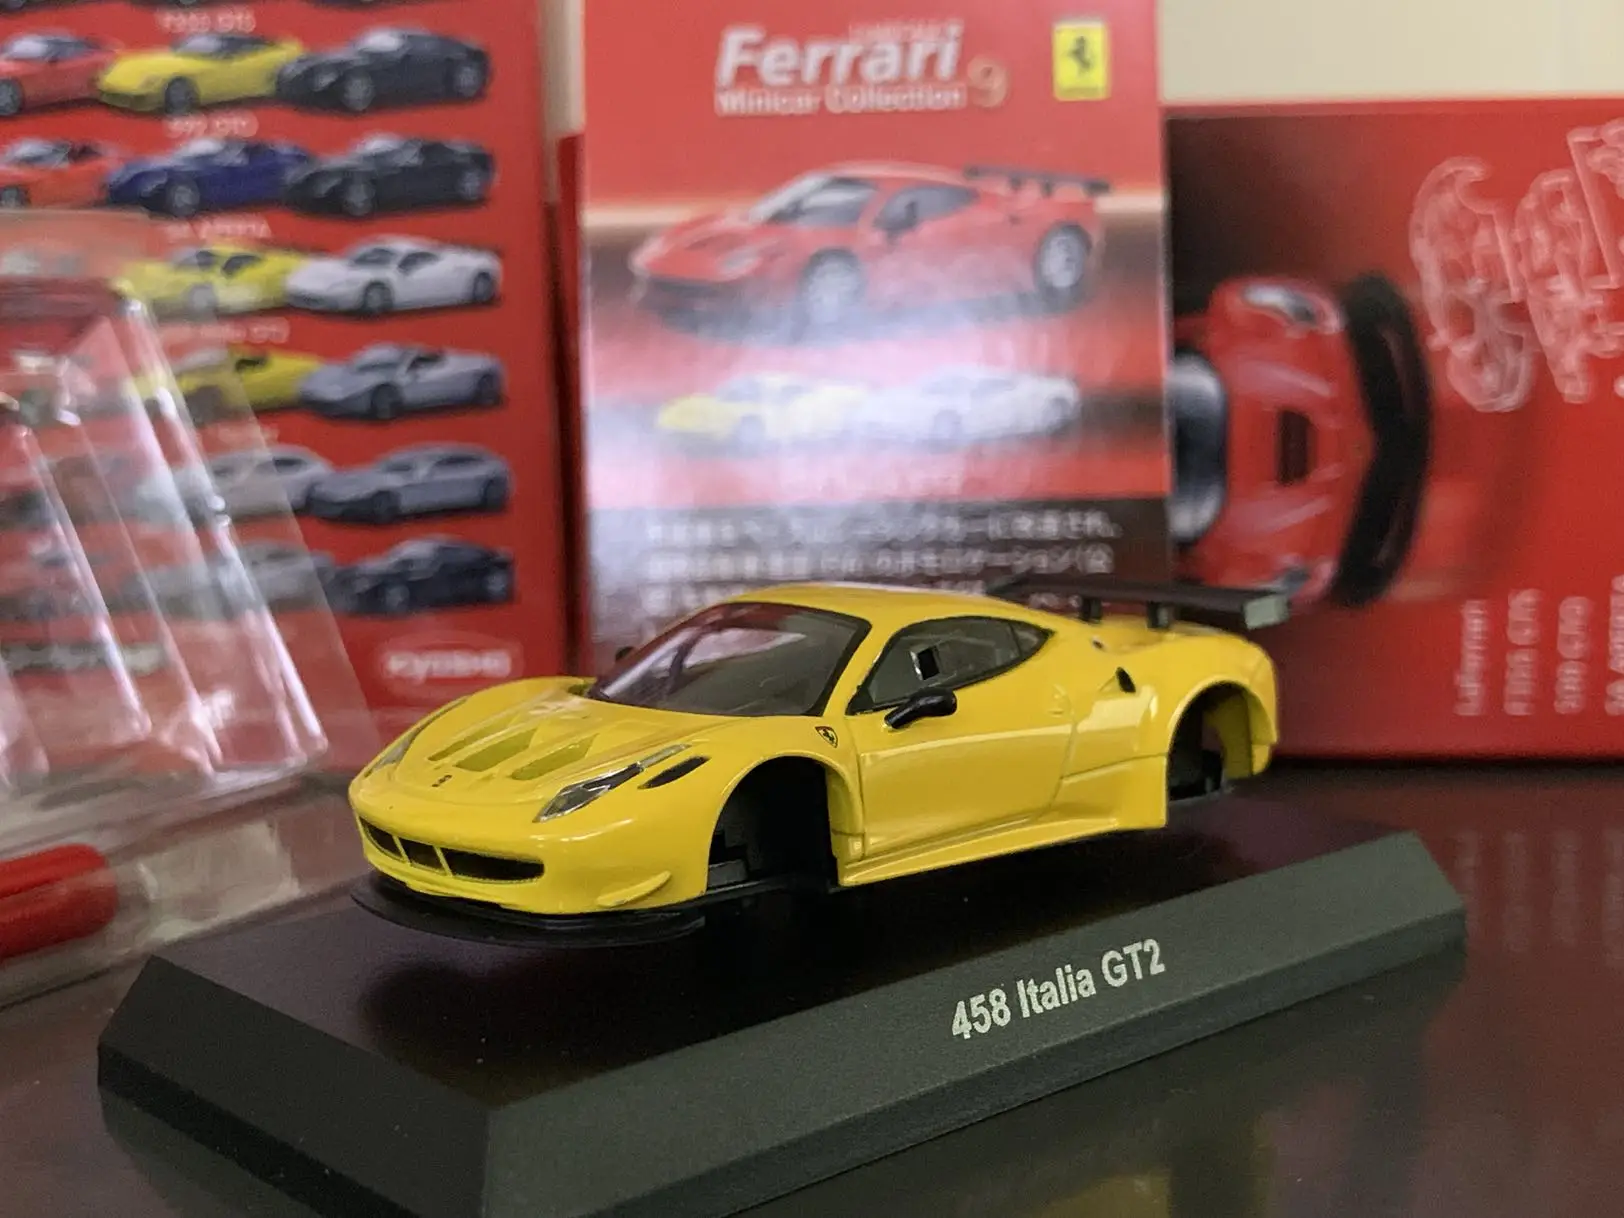 

1/64 KYOSHO Ferrari 458 GT2 Collection of die-cast alloy assembled car decoration model toys